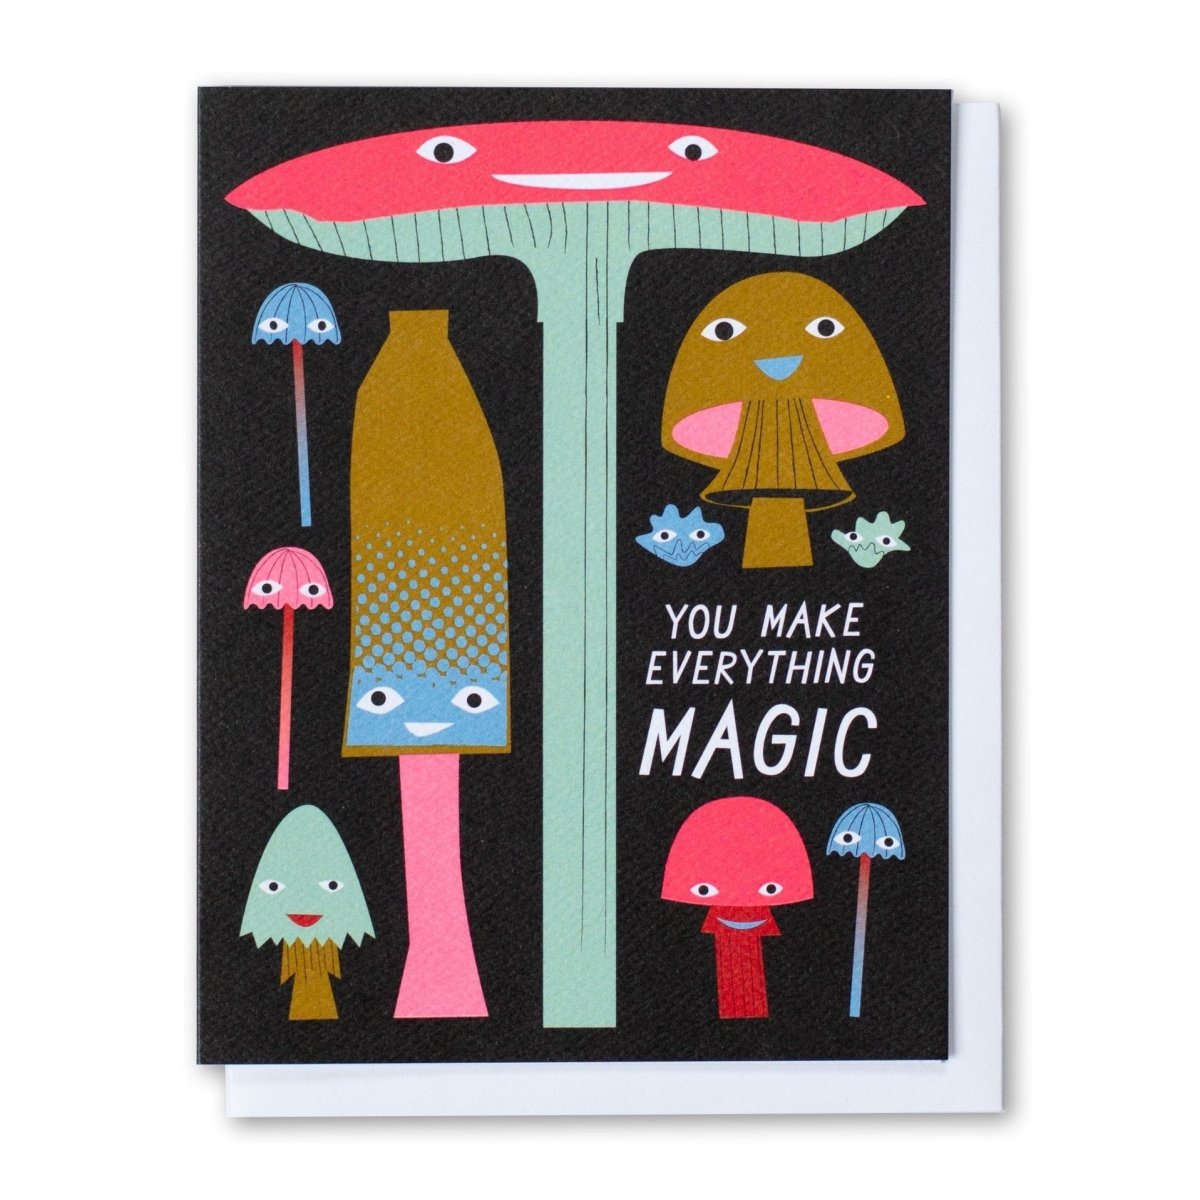 A black greeting card with pink, green, red, blue and brown mushroom illustrations. Front of card reads: "YOU MAKE EVERYTHING MAGIC." Made with recycled paper by Banquet Atelier in Vancouver, British Columbia, Canada.